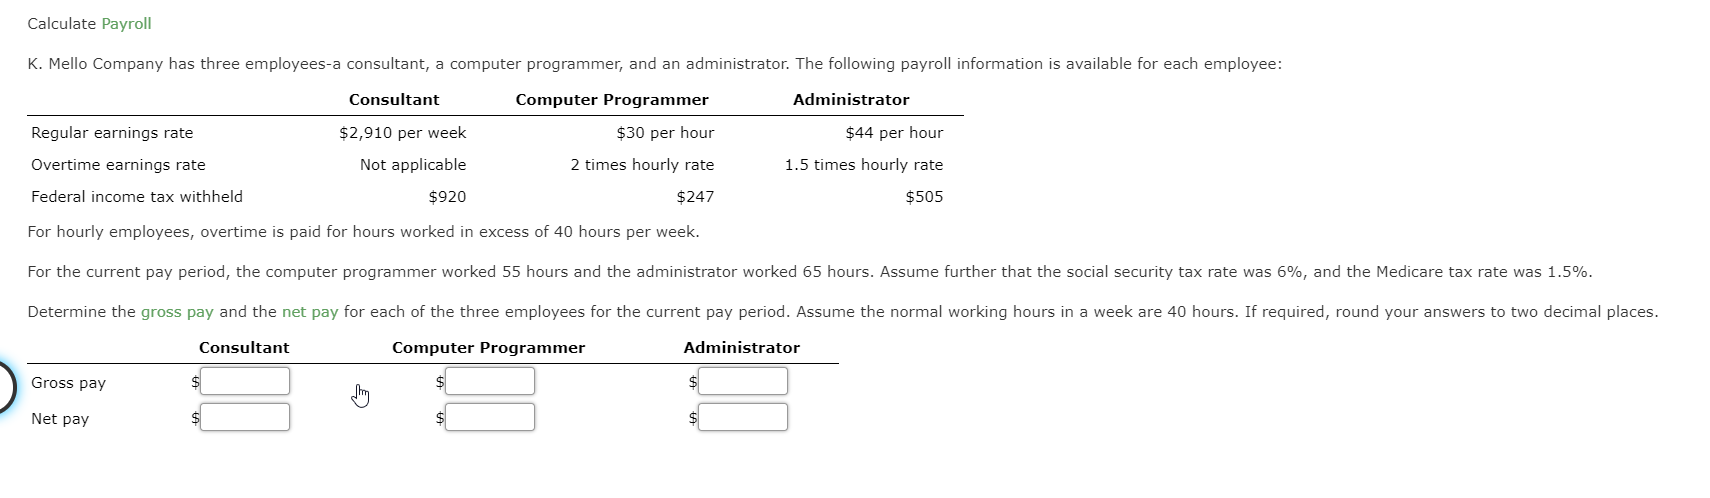 Calculate Payroll
K. Mello Company has three employees-a consultant, a computer programmer, and an administrator. The following payroll information is available for each employee:
Consultant
Administrator
Regular earnings rate
Overtime earnings rate
$2,910 per week
Not applicable
Computer Programmer
$30 per hour
2 times hourly rate
$44 per hour
1.5 times hourly rate
Federal income tax withheld
$247
$505
$920
For hourly employees, overtime is paid for hours worked in excess of 40 hours per week.
For the current pay period, the computer programmer worked 55 hours and the administrator worked 65 hours. Assume further that the social security tax rate was 6%, and the Medicare tax rate was 1.5%.
Determine the gross pay and the net pay for each of the three employees for the current pay period. Assume the normal working hours in a week are 40 hours. If required, round your answers to two decimal places.
Consultant
Computer Programmer
Administrator
Gross pay
Net pay
